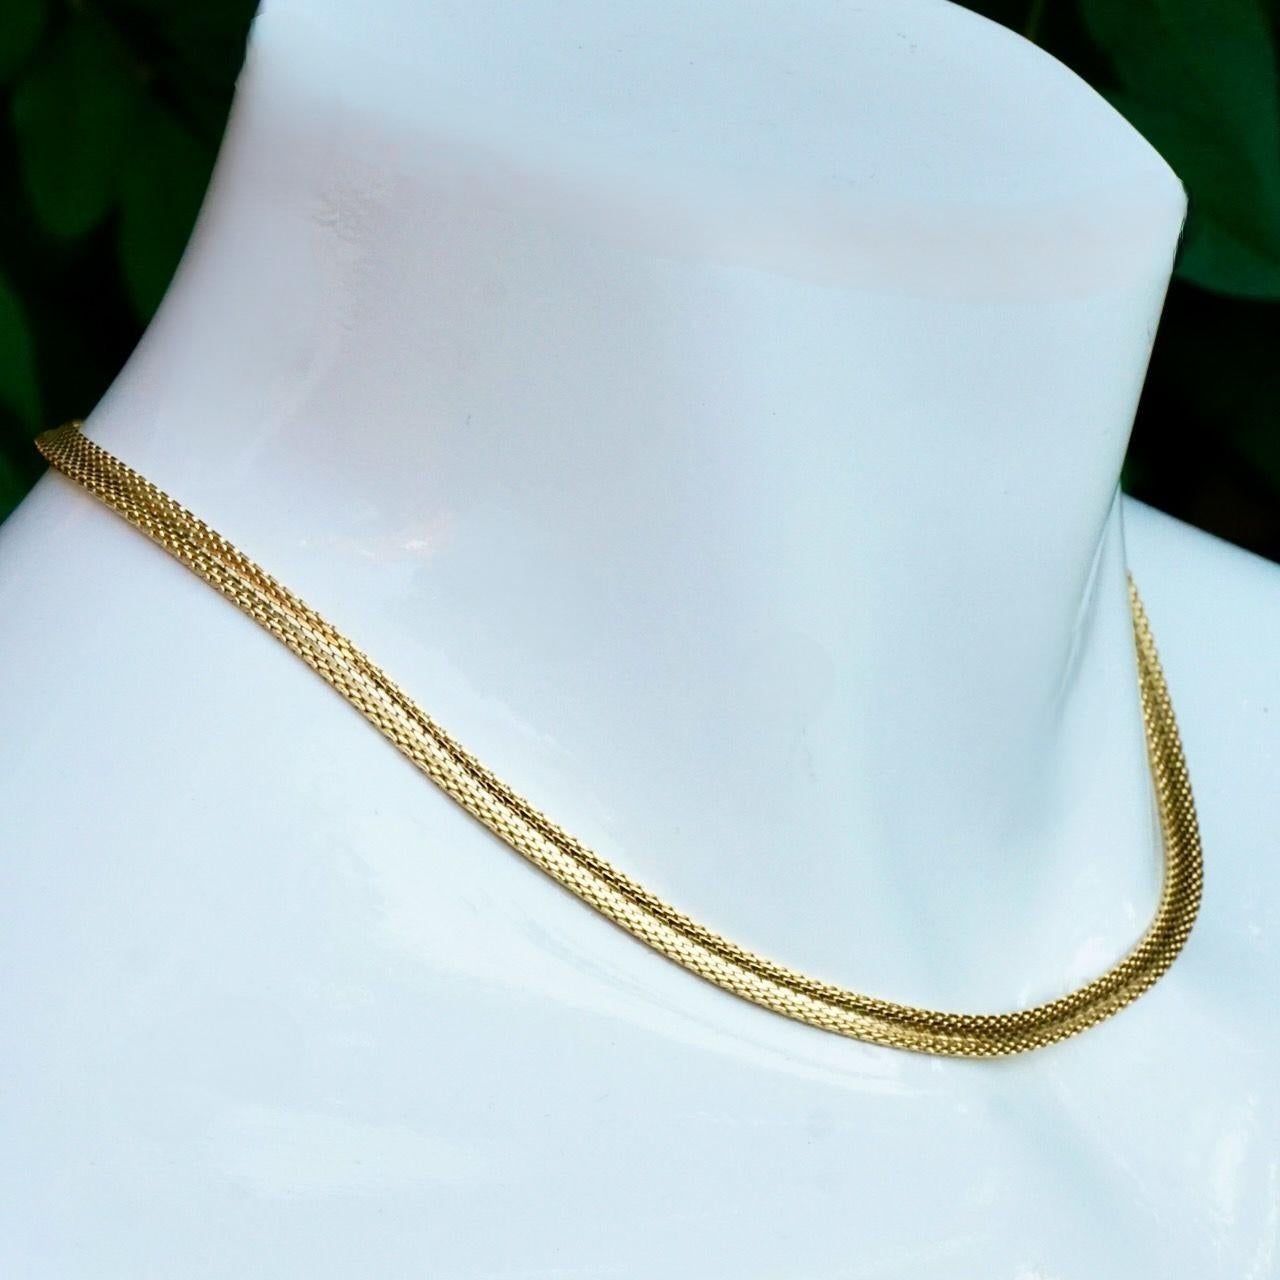 Gold Plated Egyptian Revival Textured and Shiny Mesh Collar Necklace circa 1980s 2